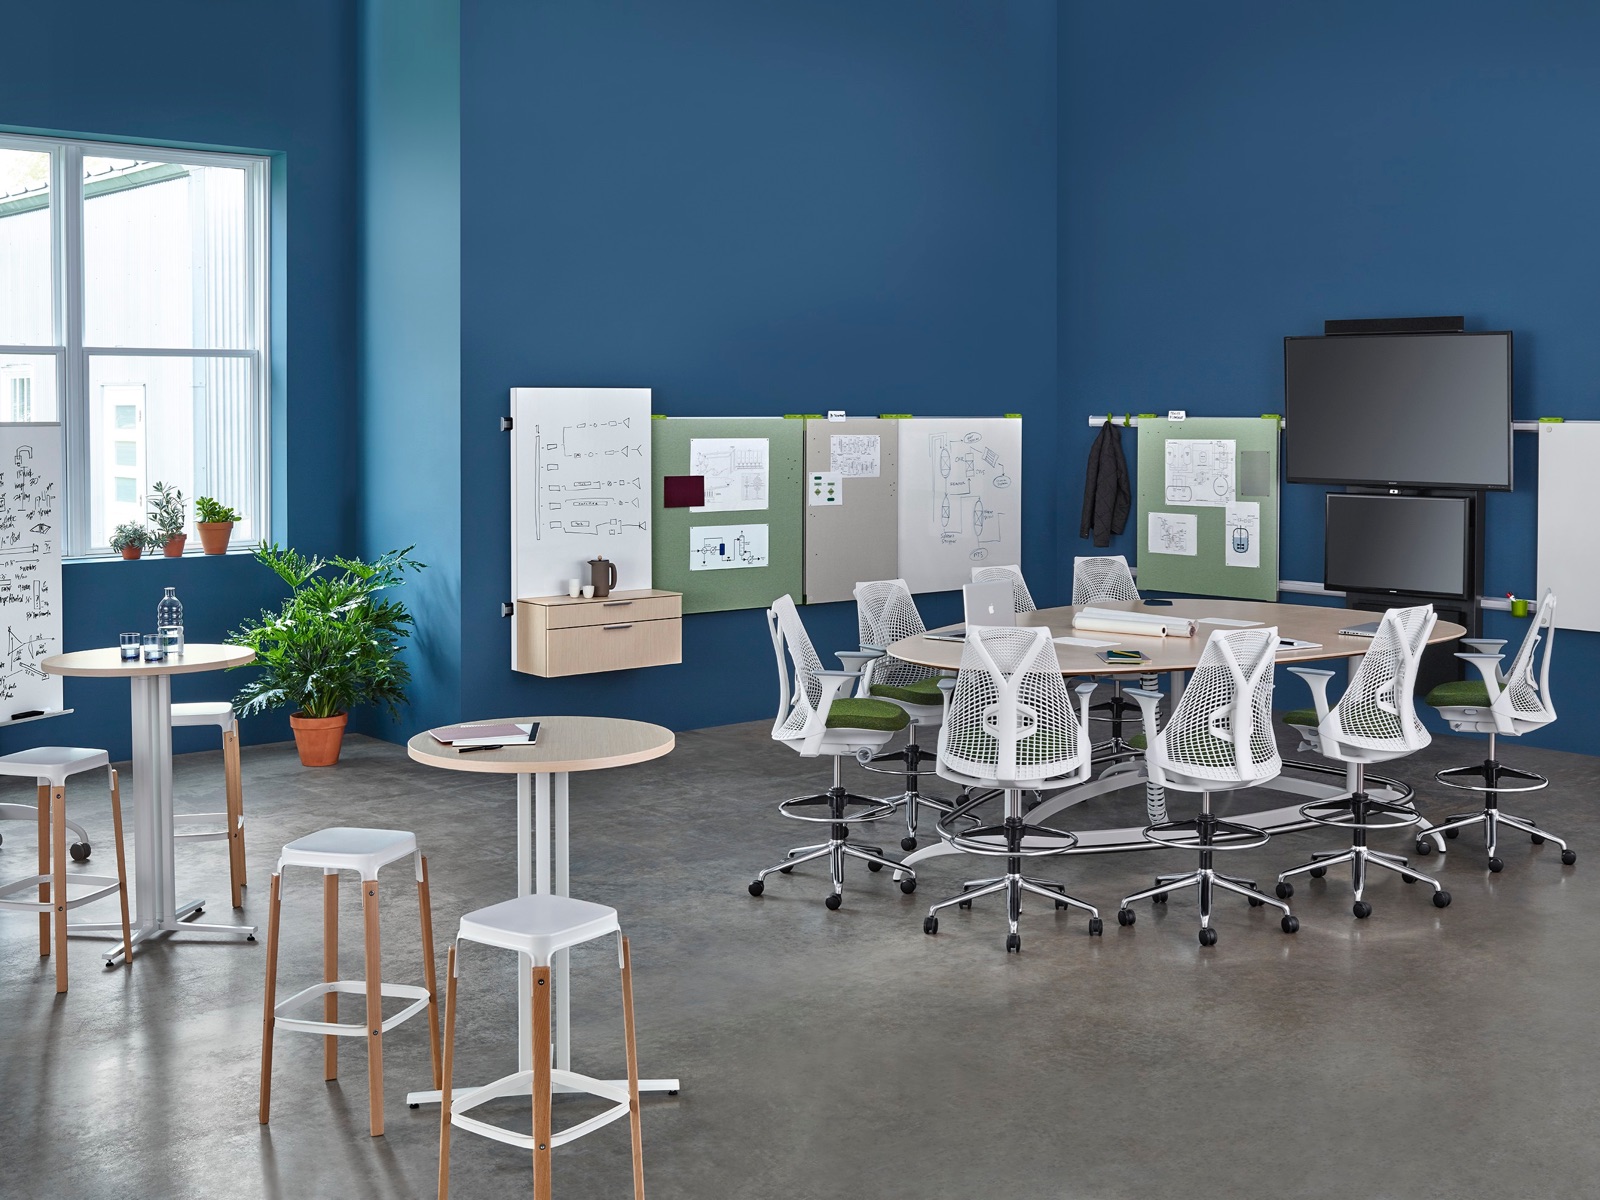 White Sayl Stools with green seat pads surround a teardrop Exclave table in a collaboration space with wall-hung display boards and dual monitors.